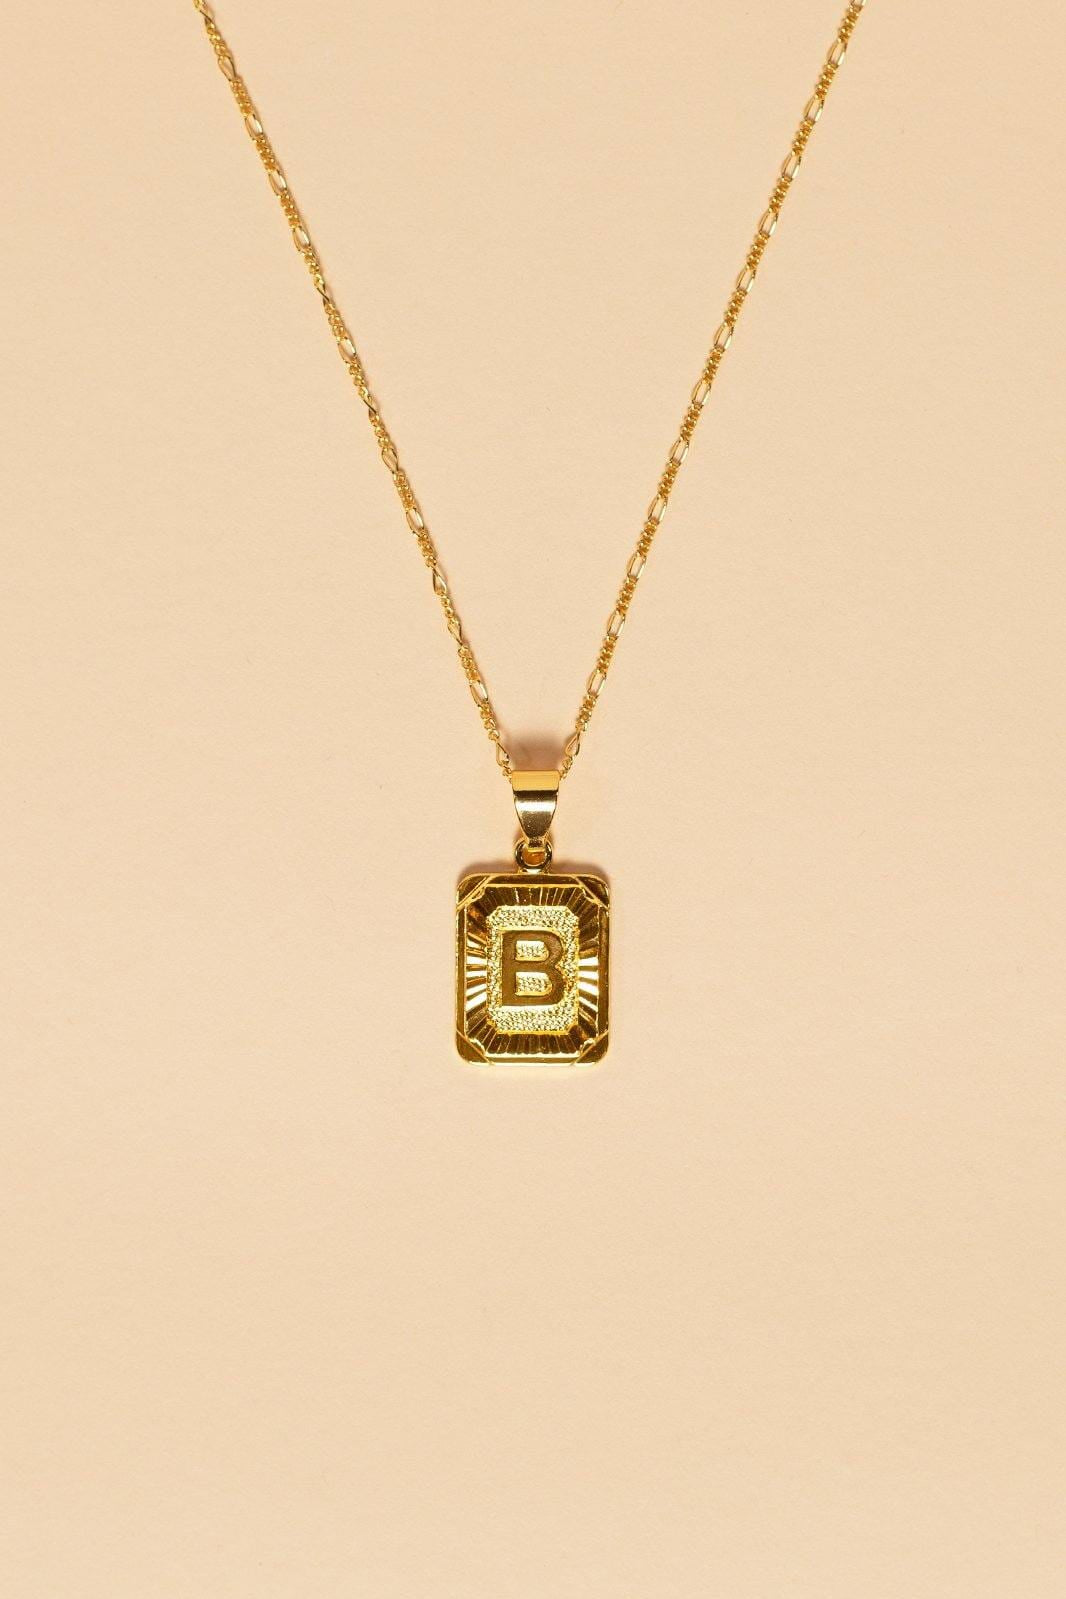 INITIAL CARD NECKLACE GOLD FIL - GOLD - F